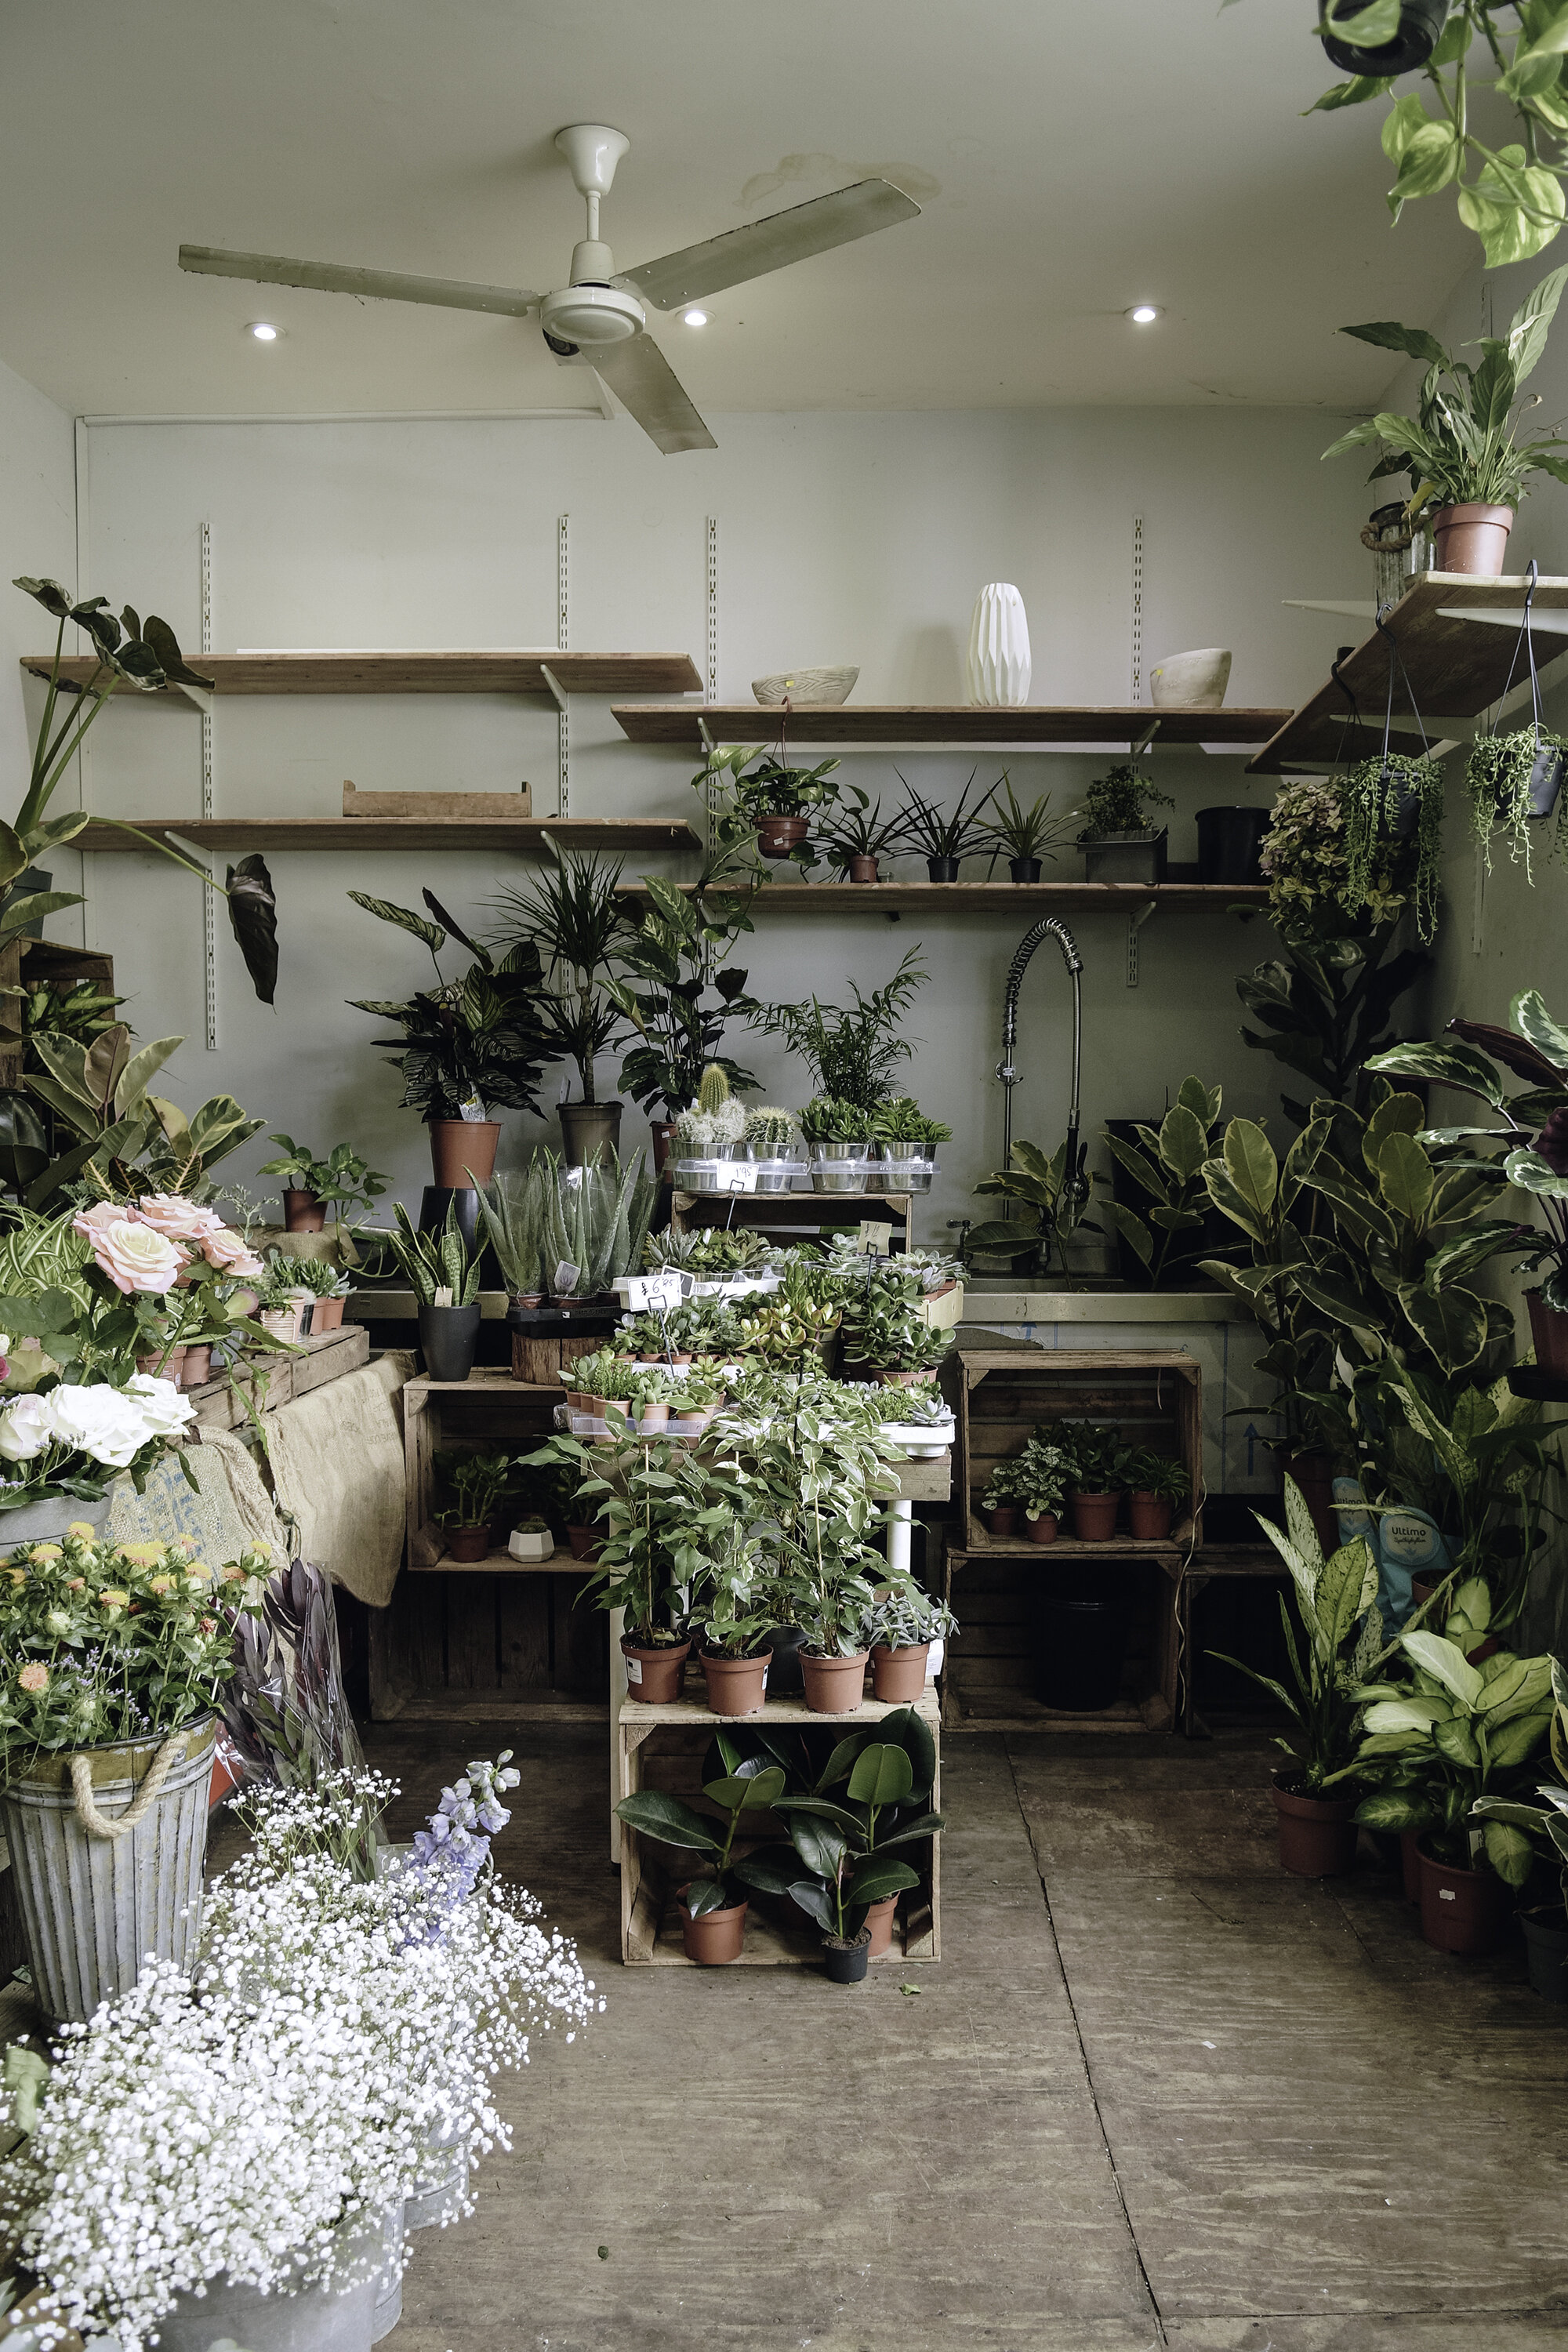 91 Magazine Instagrammer's Guide to North London -green room cafe - tanya arya photography